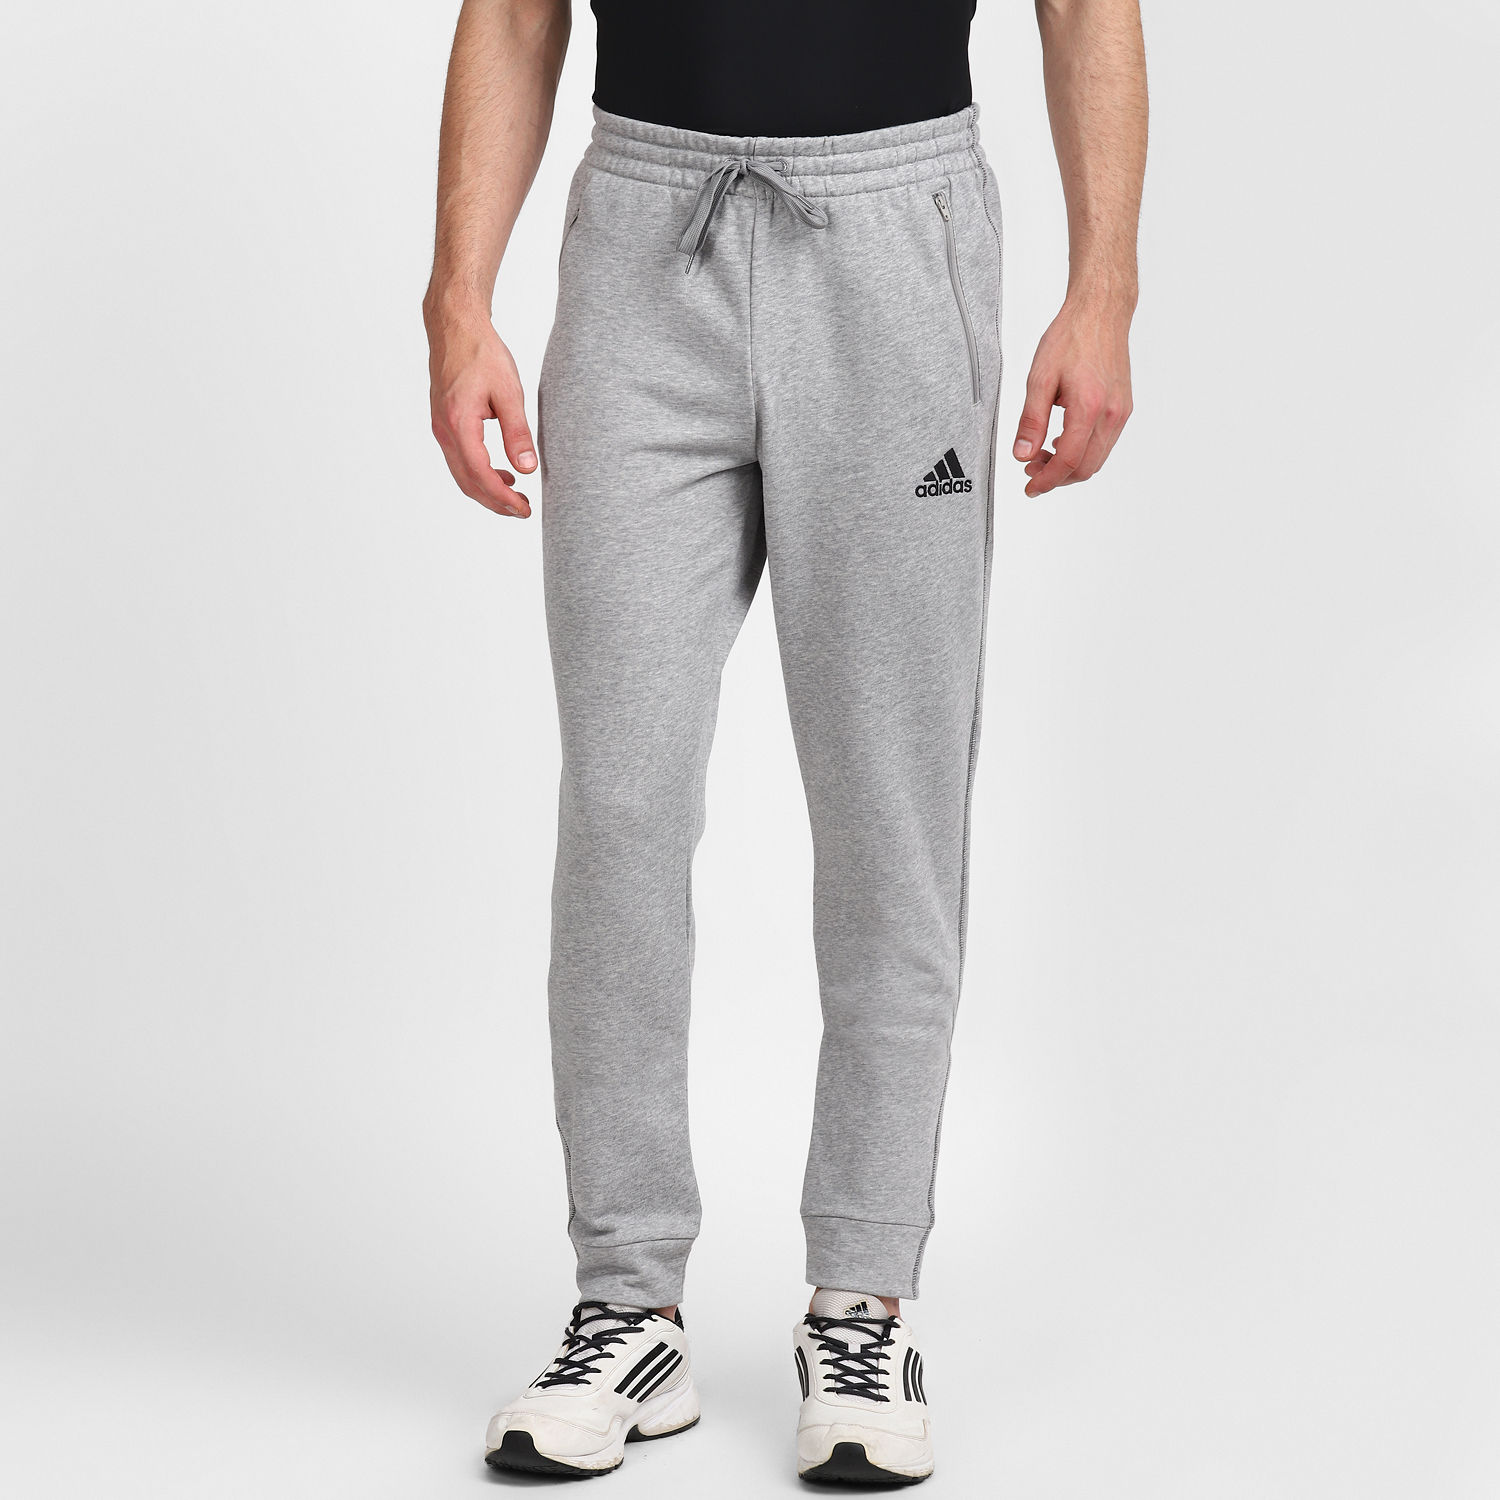 adidas,Mens,Street Pants,Black,Small : Amazon.in: Clothing & Accessories